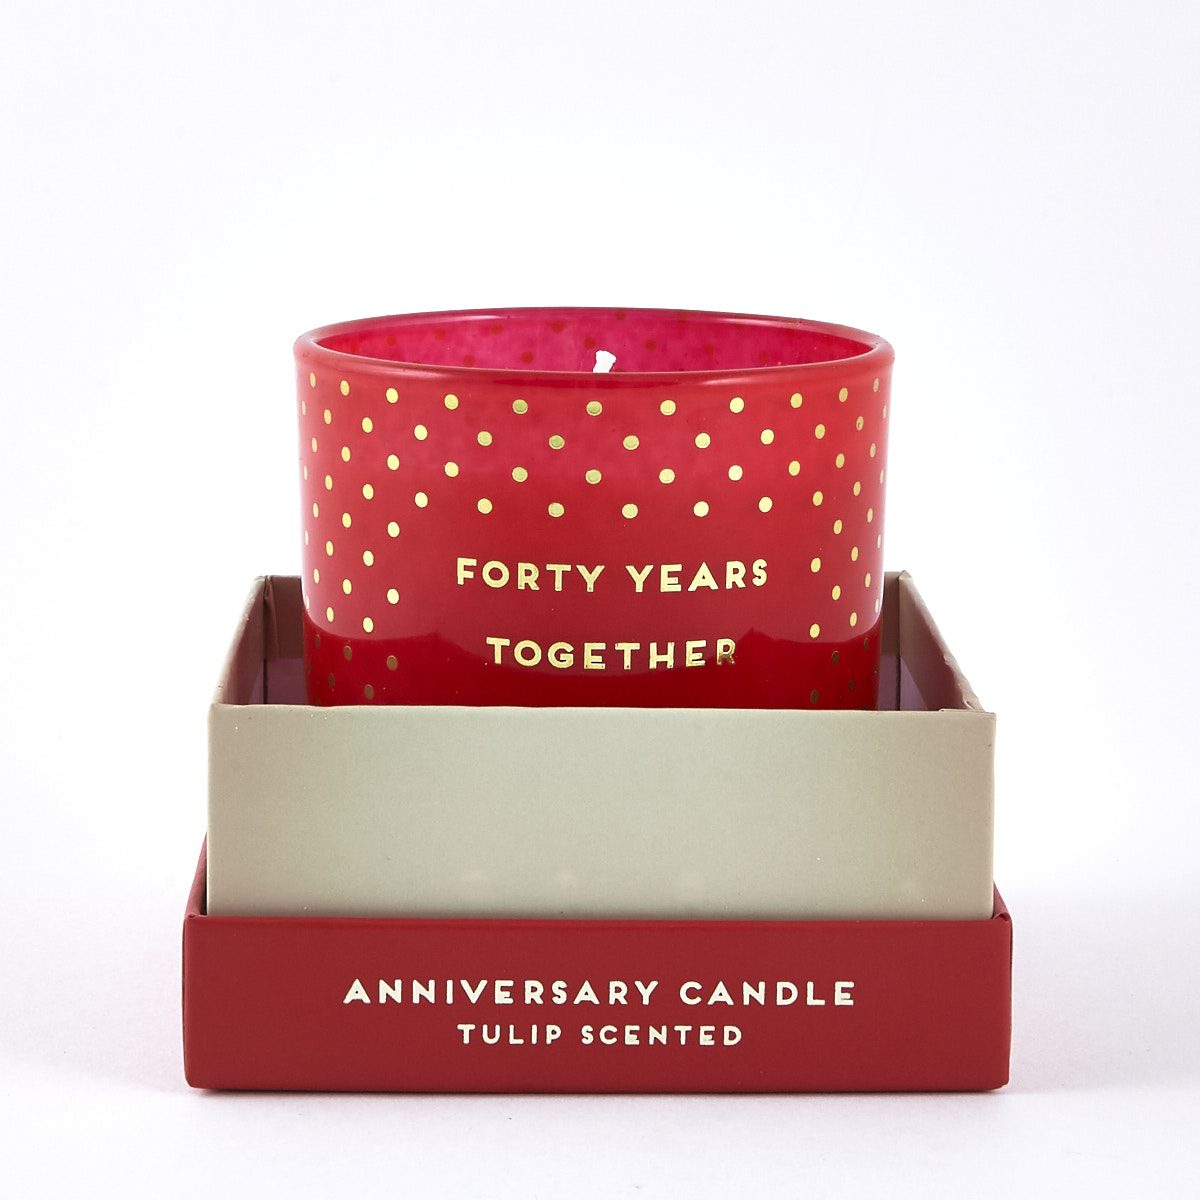 Tulip Scented Ruby Wedding Anniversary Candle